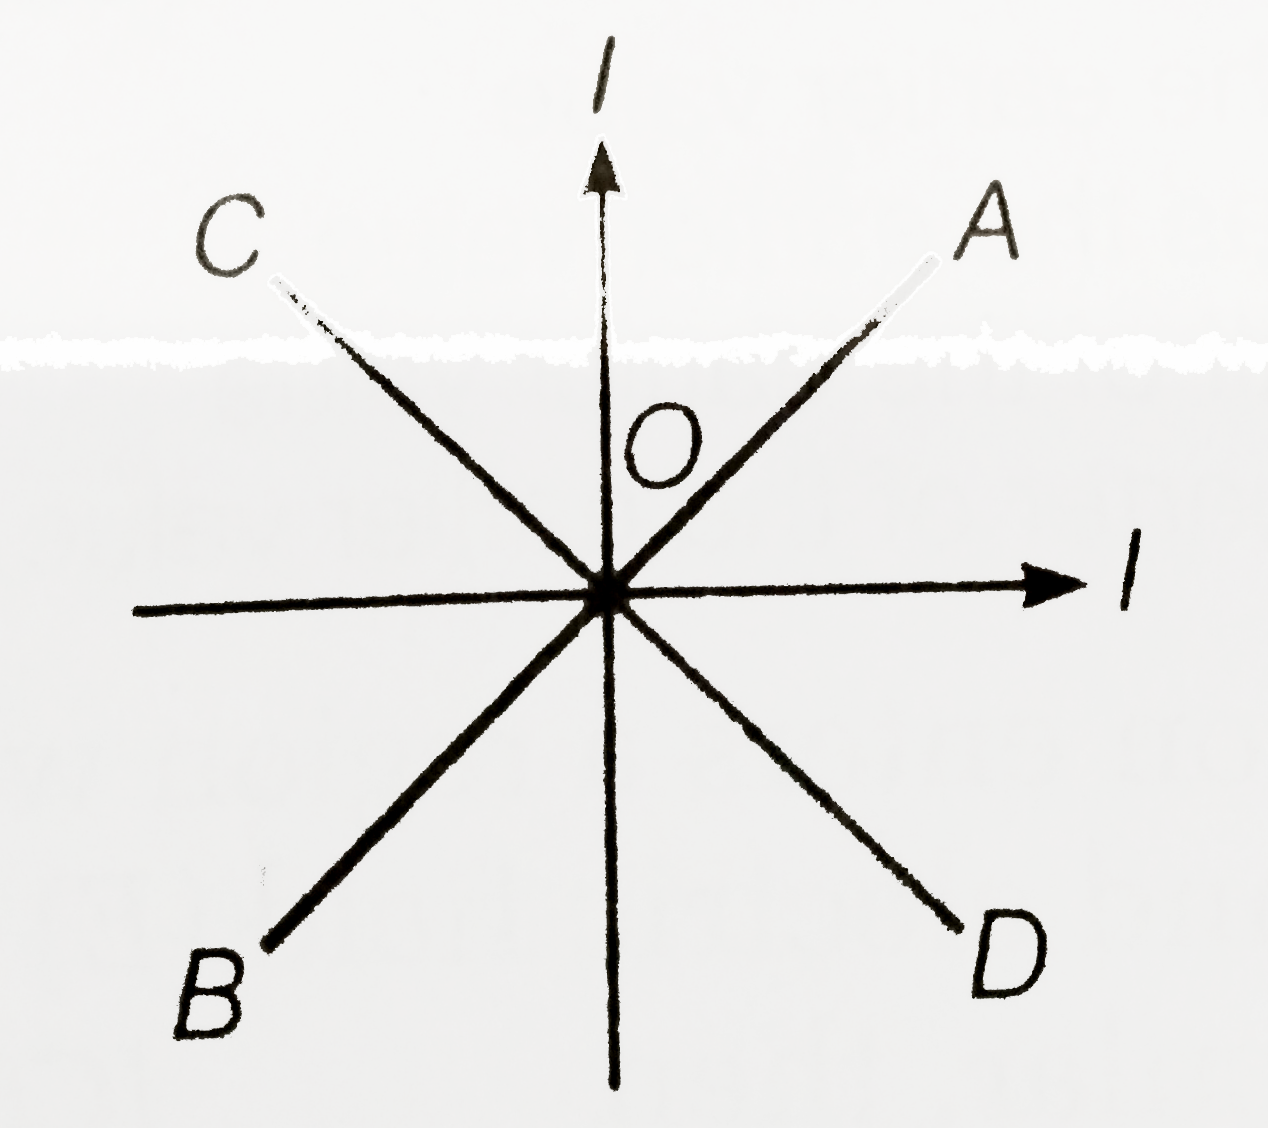 Two equal electroic currents are flowing perpendicular to each other as shown oin the figure. AB and CD are perpendicular to each other and symeetrically placed w.r.t the currents, where do we except the resultant magnetic field to be zero ?